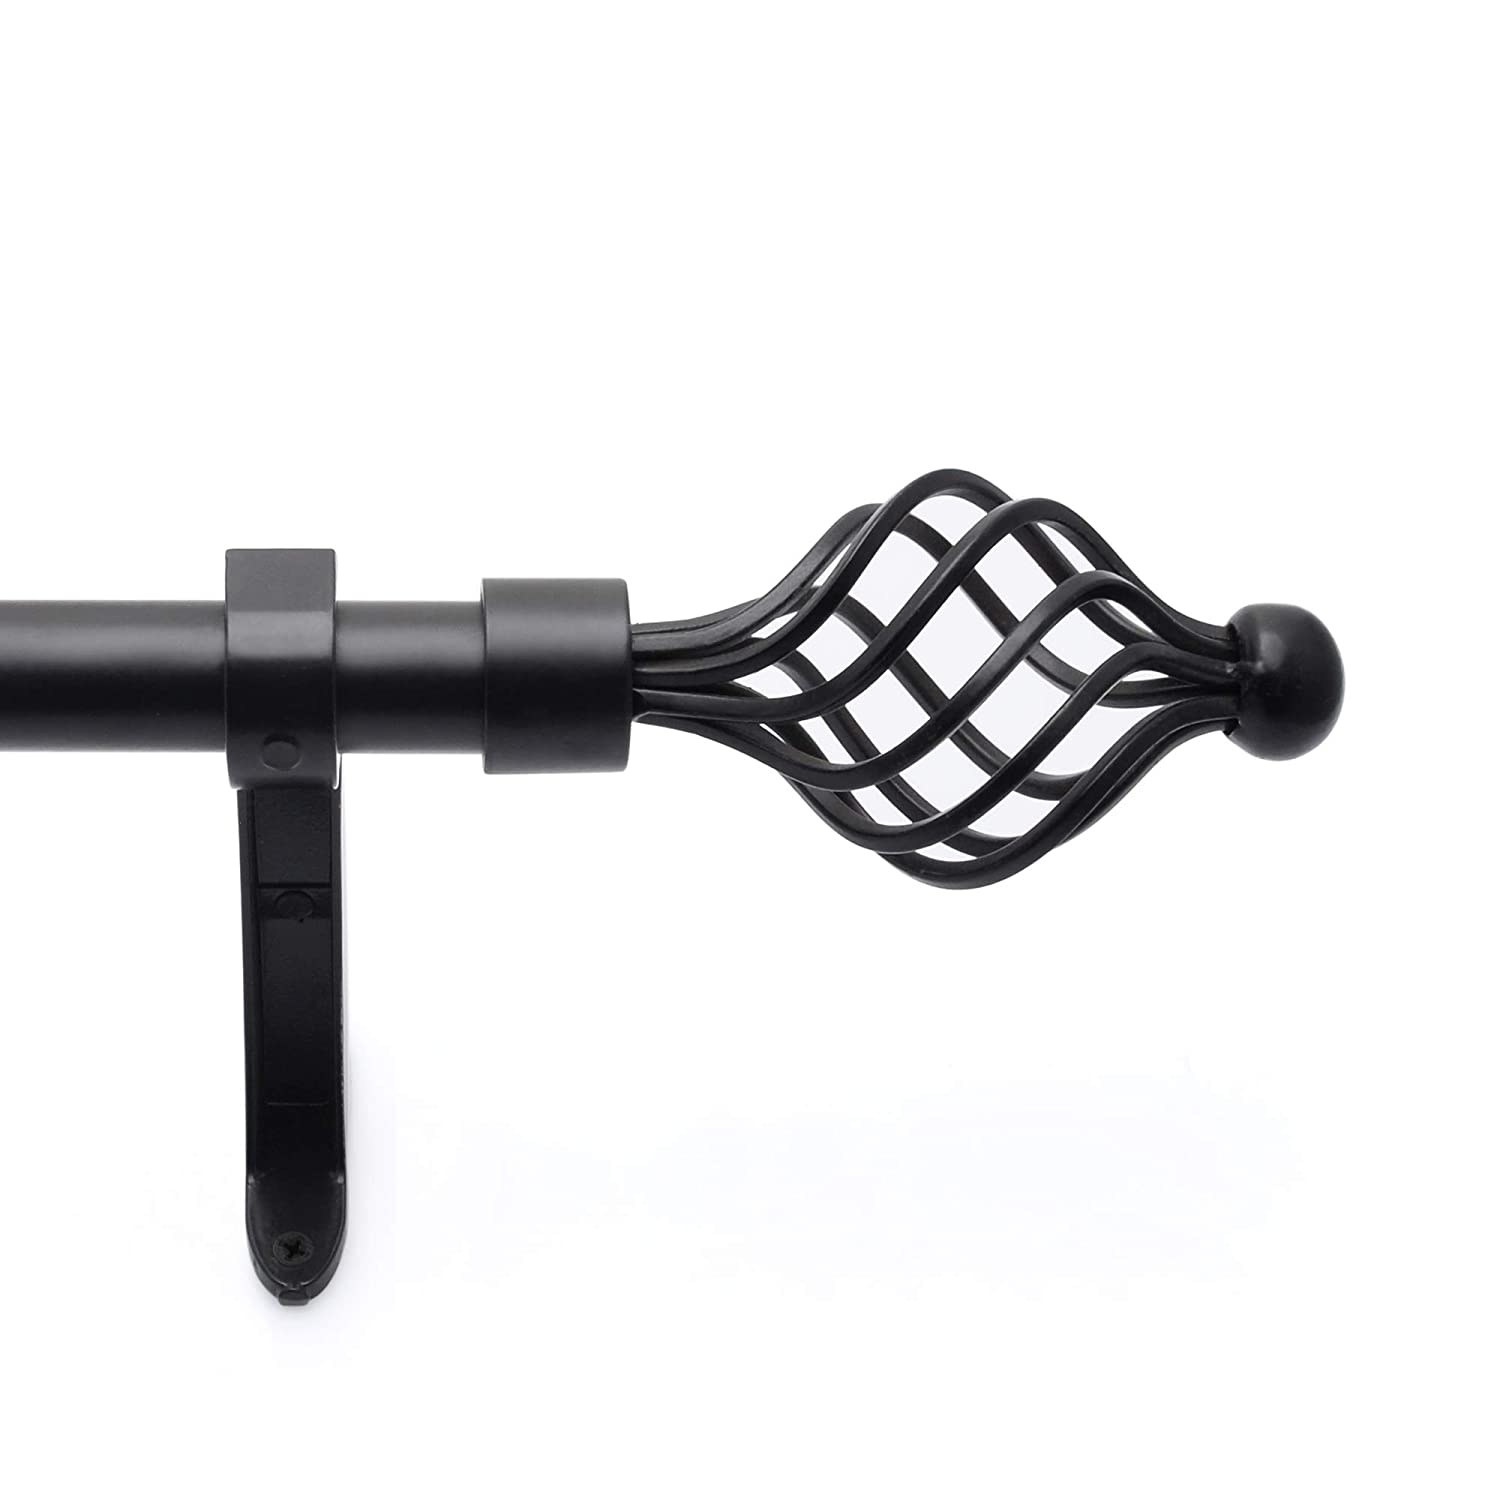 Black extendable curtain rod with a grill bulb structure on each end